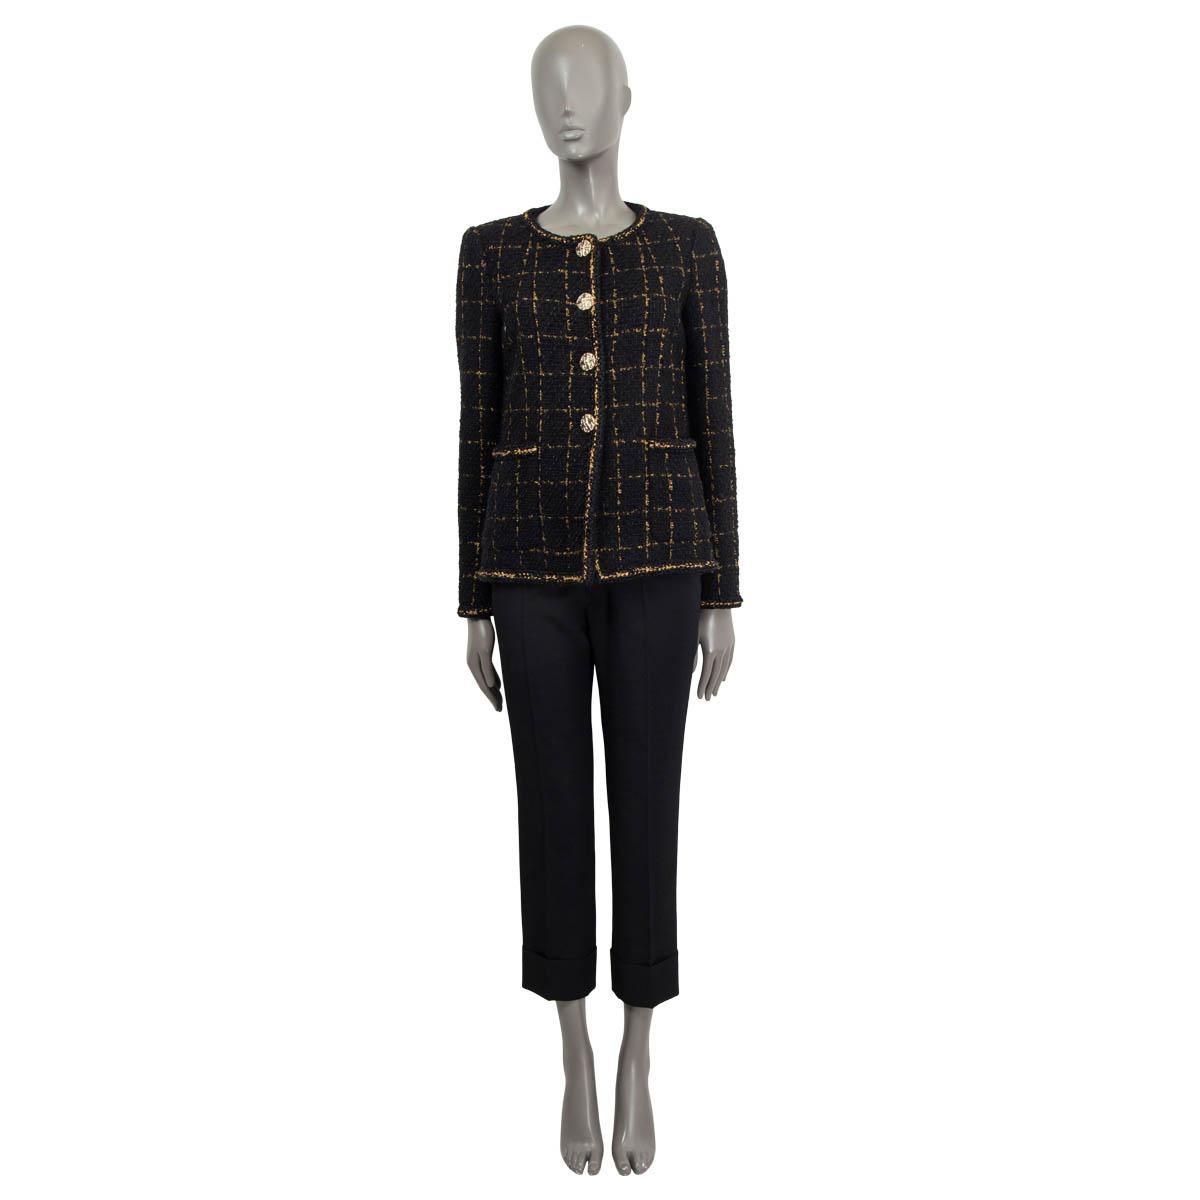 100% authentic Chanel Fall/Winter 2016 single breasted check boucle blazer in black and gold viscose (27%), nylon (26%), wool (21%), cotton (8%), acrylic (8%), mohair (8%) and polyester (2%). Features two slit pockets on the front and 'CC' buttoned